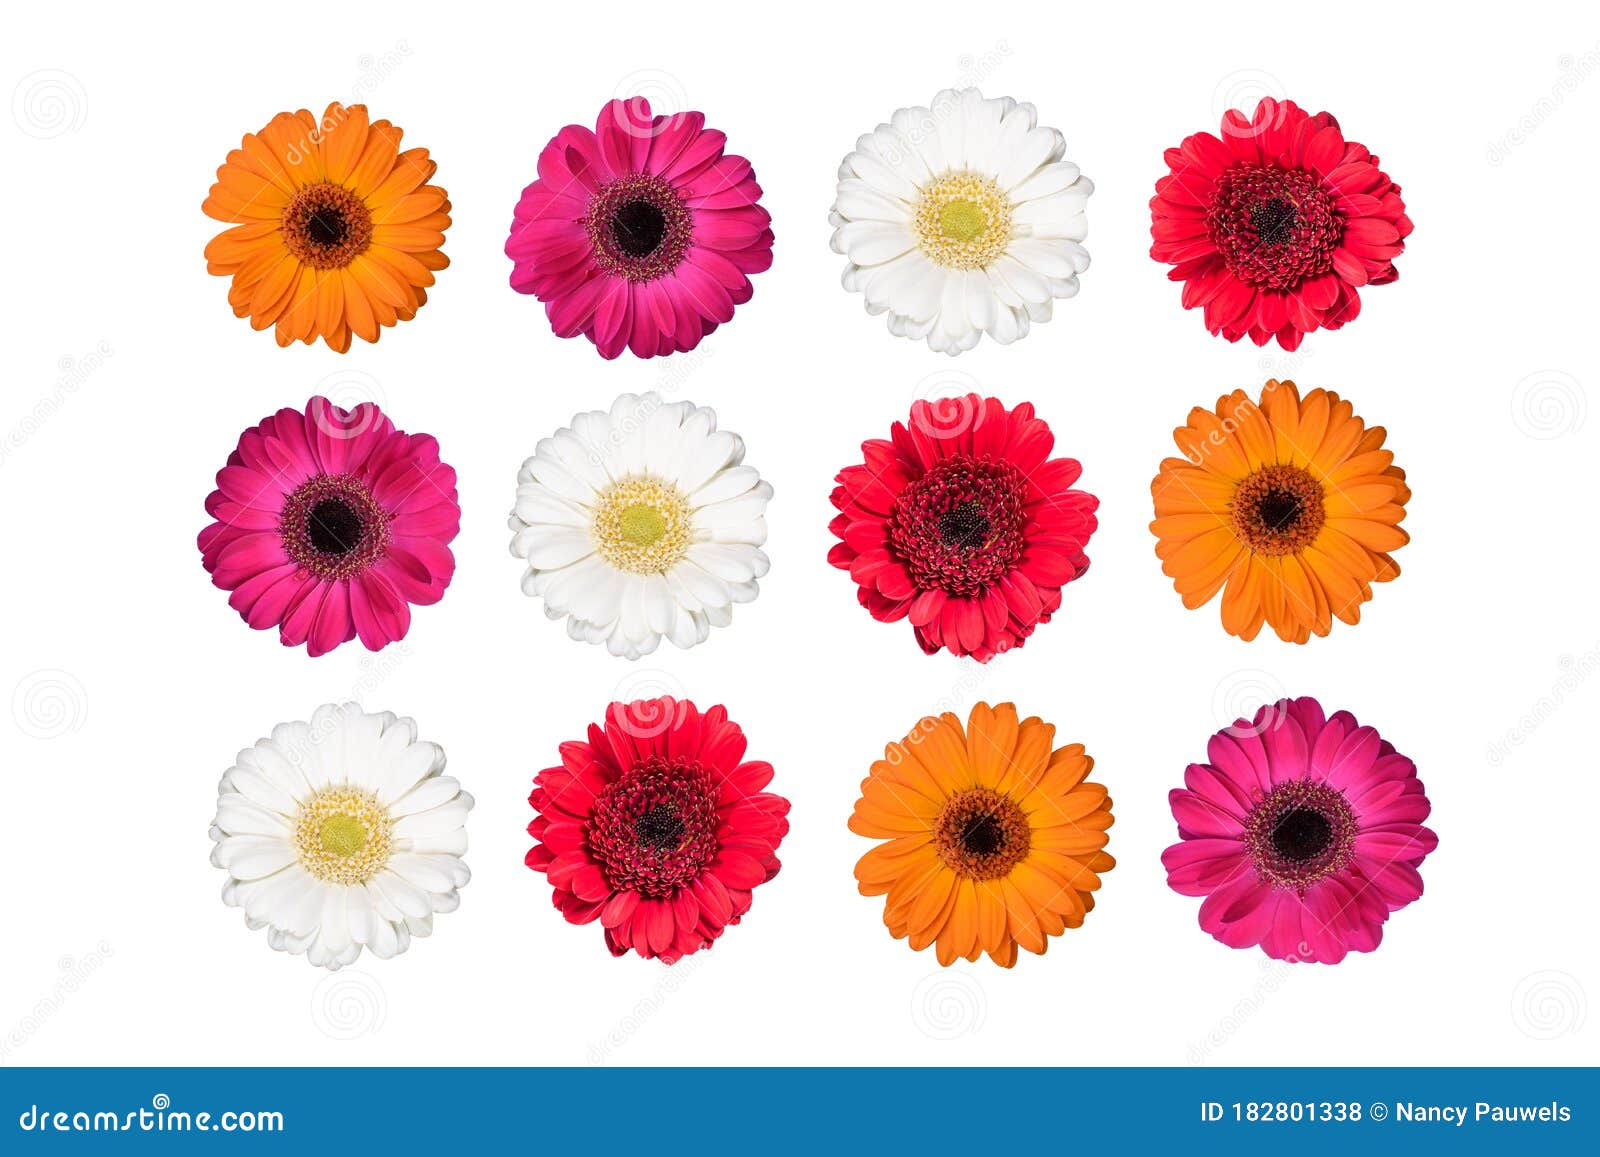 Set Of Colorful Gerbera Flowers Isolated On White Stock Photo Image Of Blooming Beauty 182801338